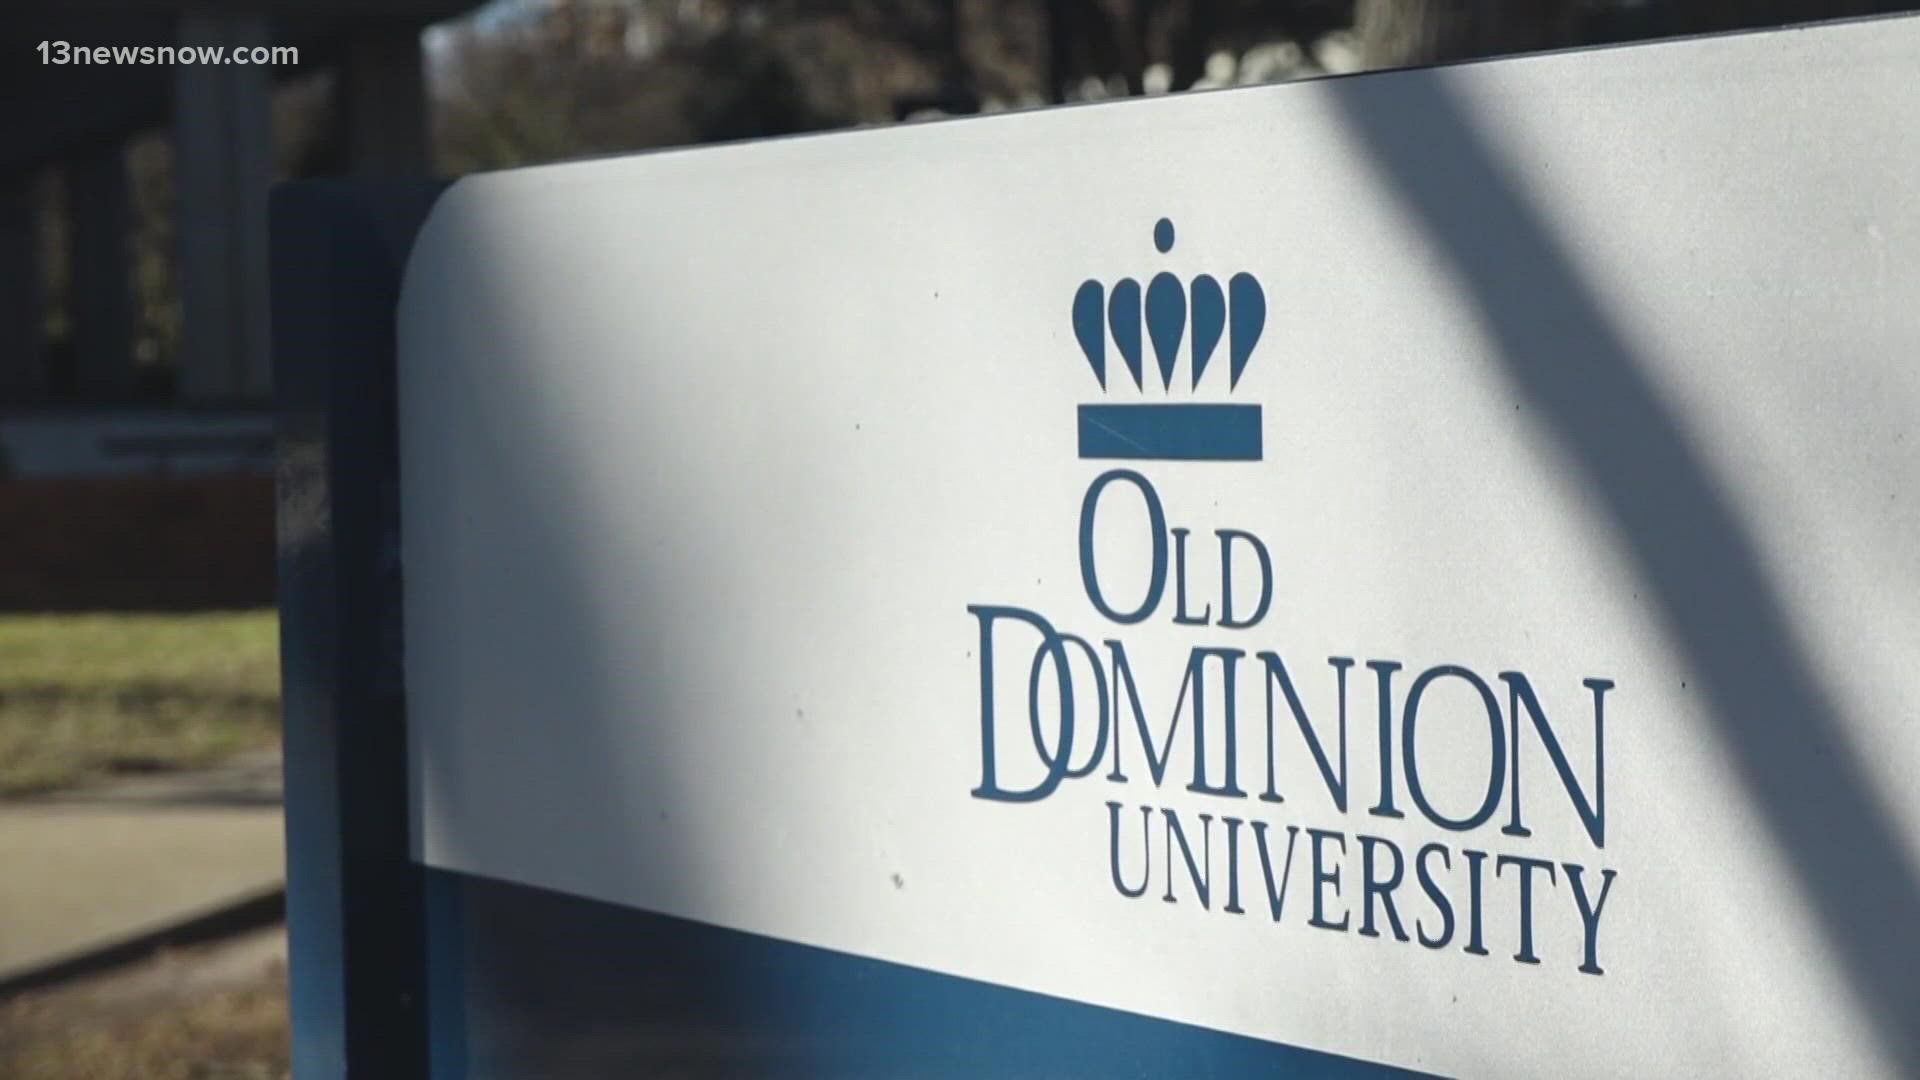 Old Dominion University is joining Every Campus A Refuge (ECAR), a national movement to provide support on college and university campuses.